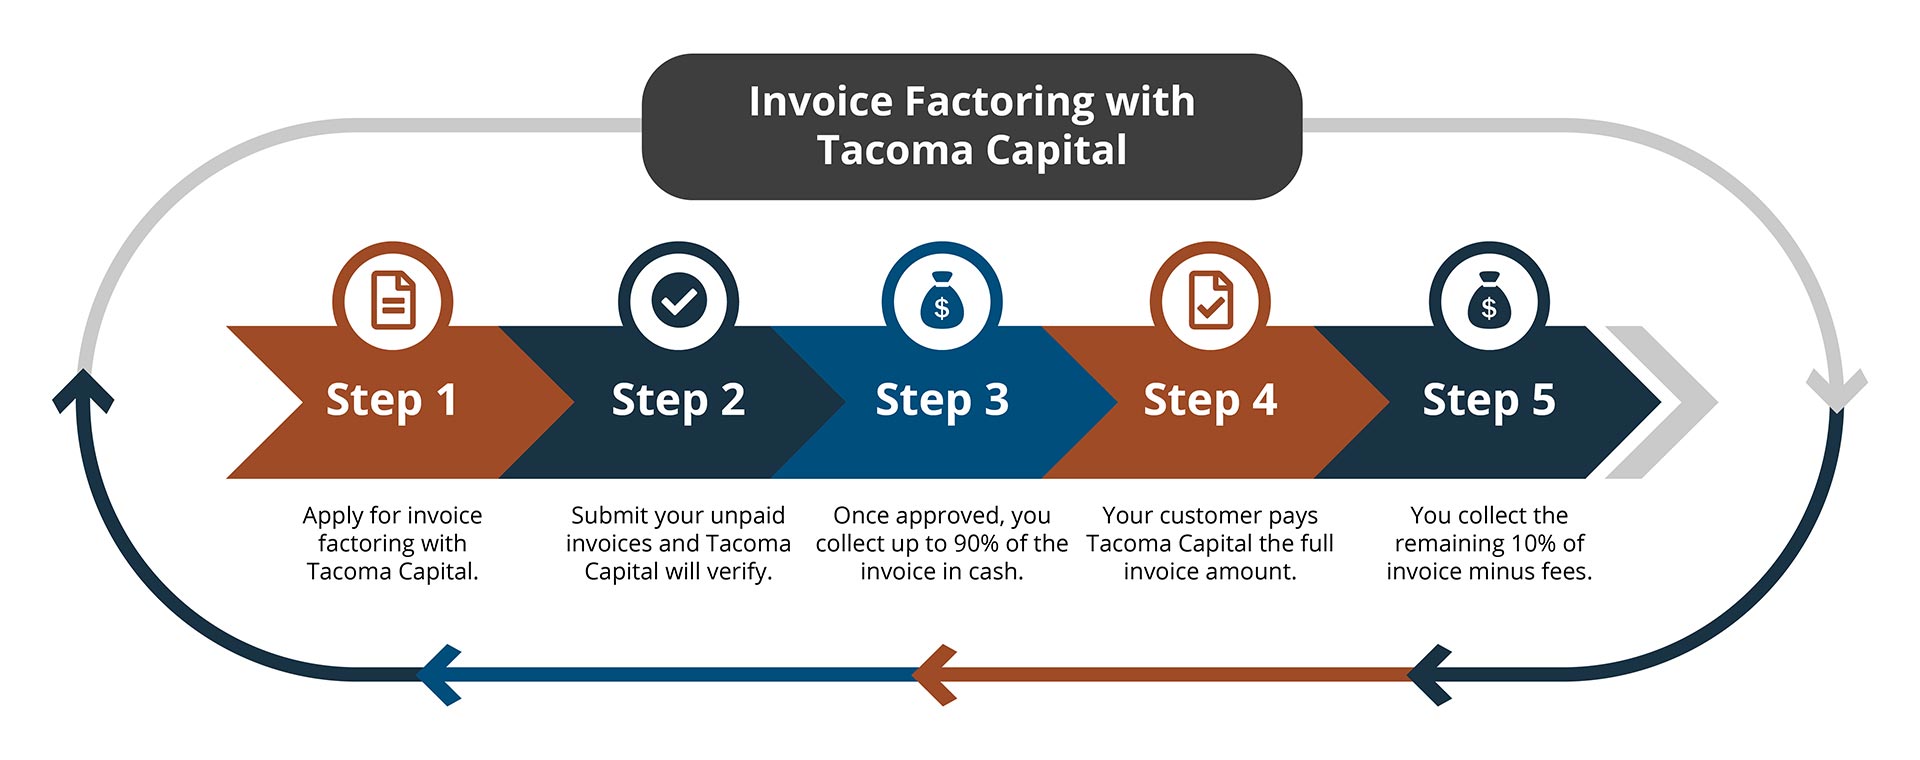 How Invoice Factoring Works With Tacoma Capital